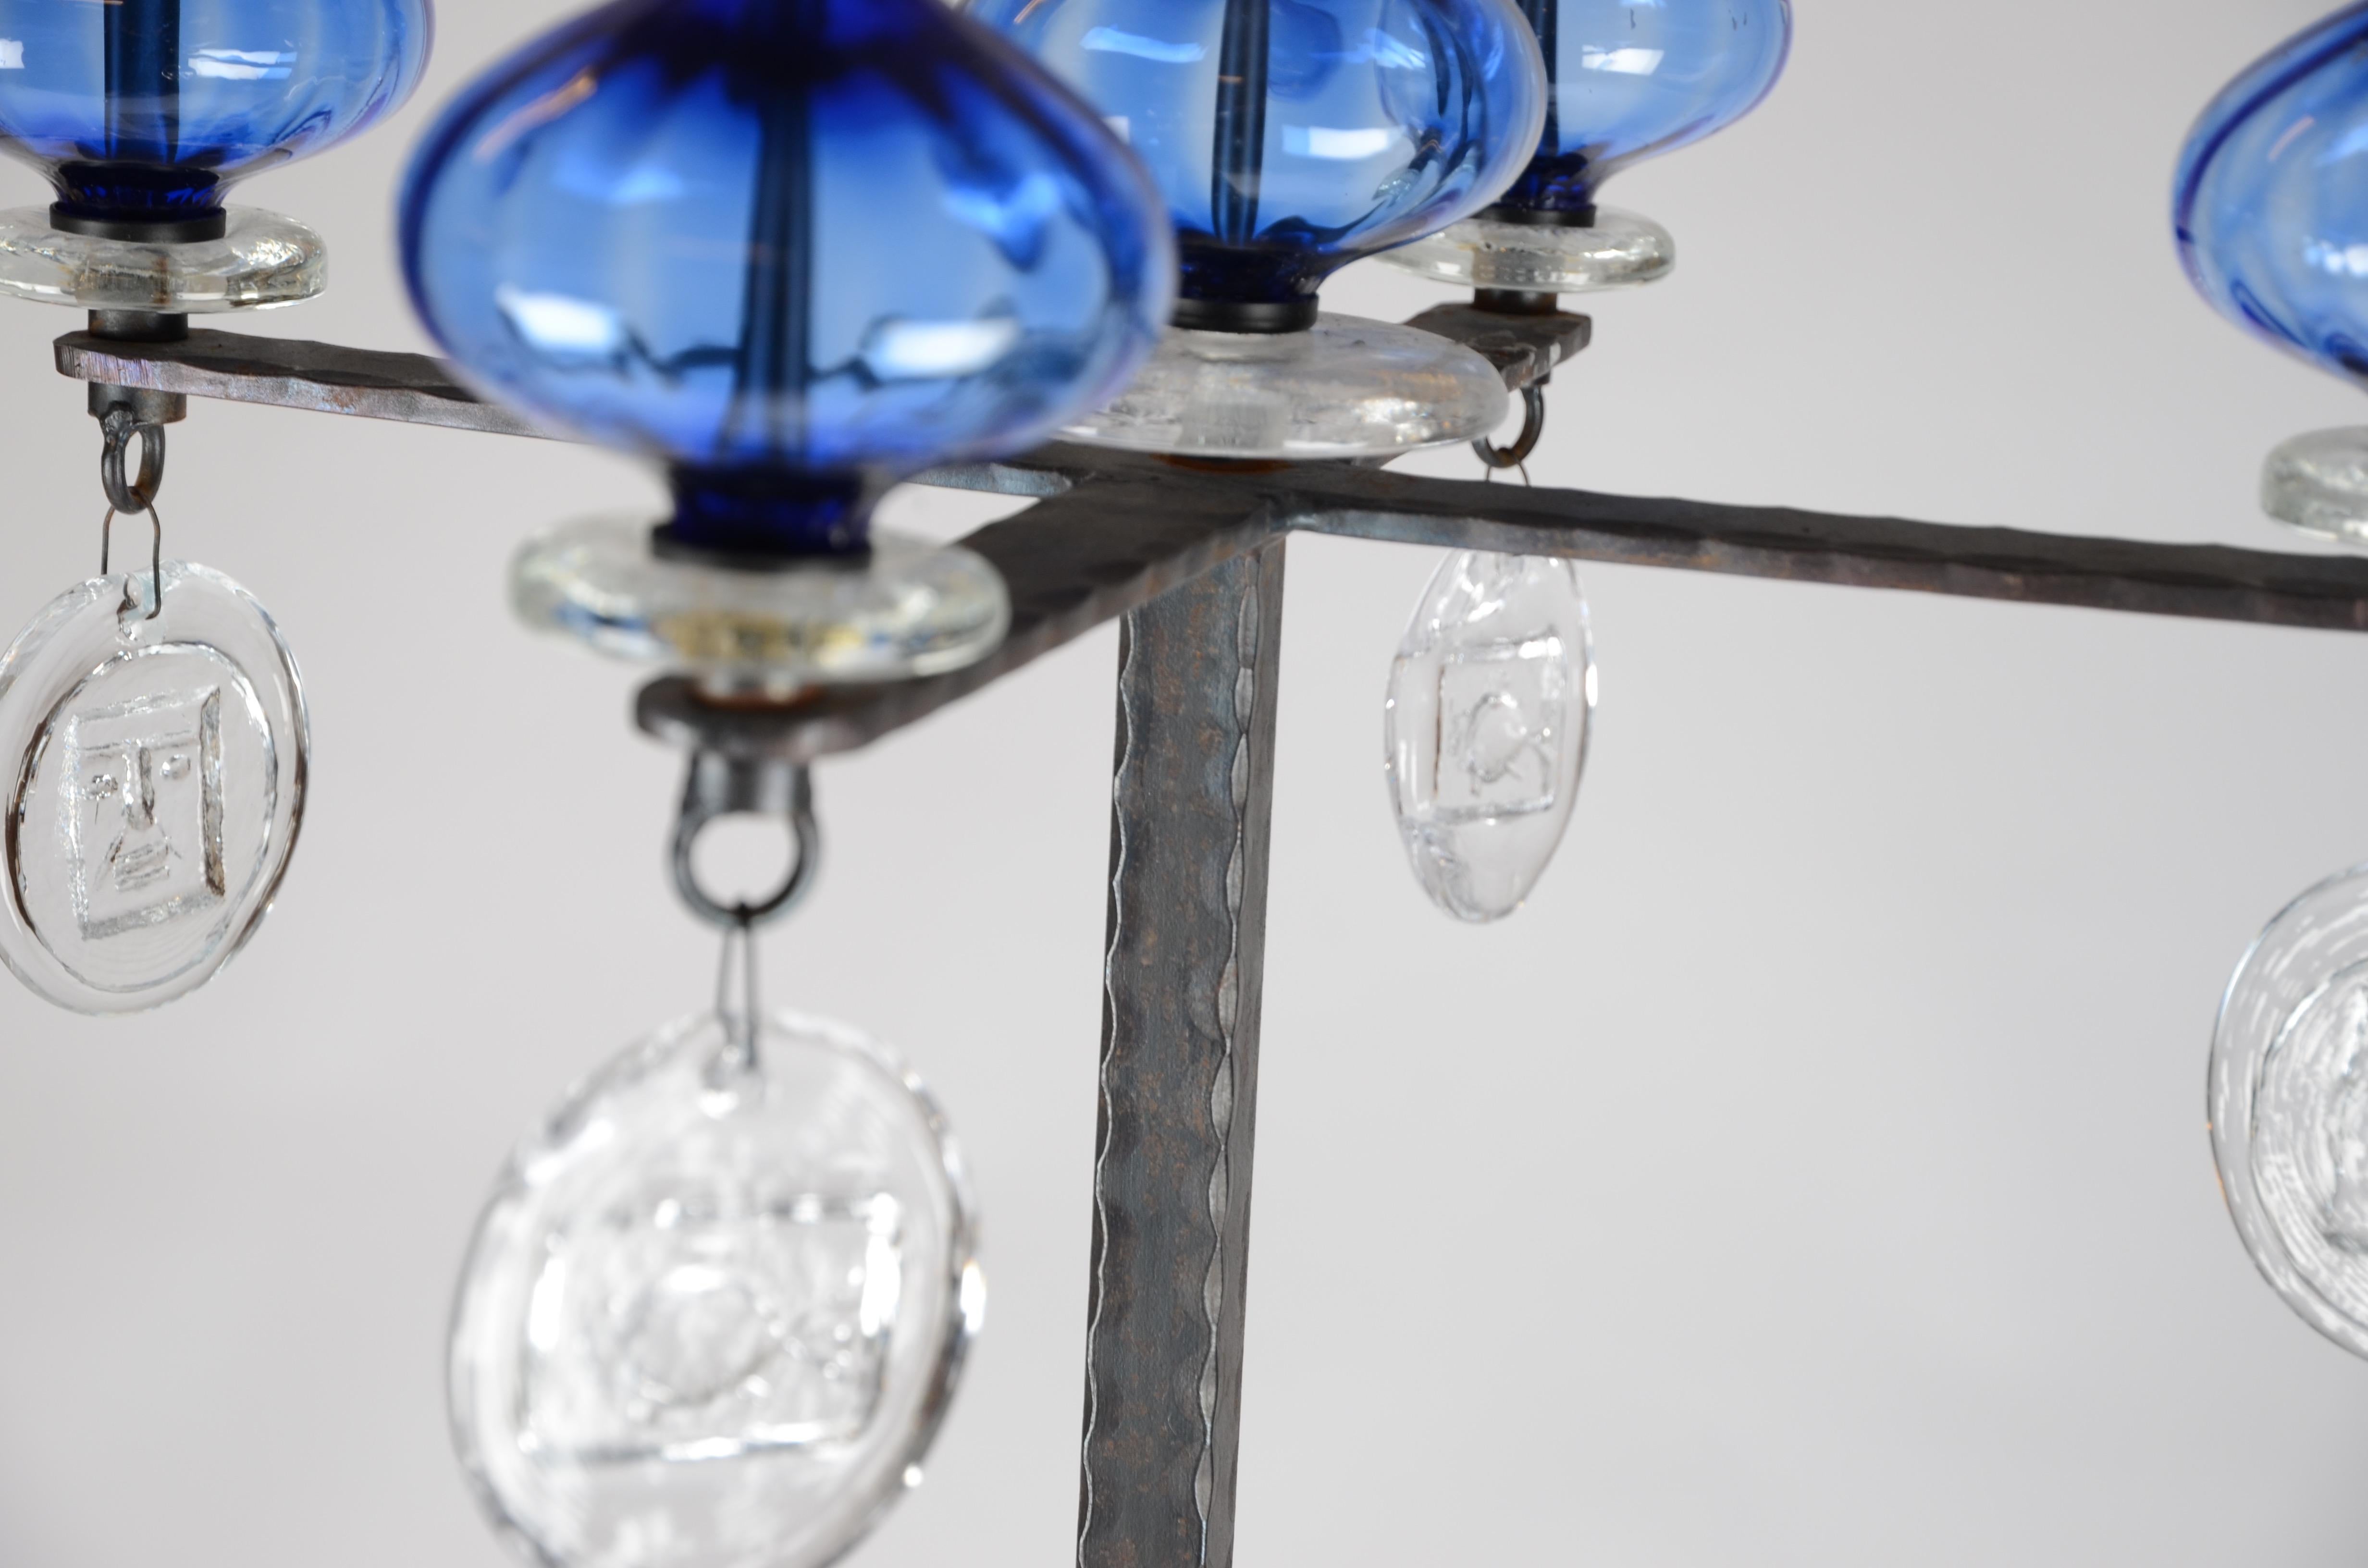 A four-armed floor candelabra, designed by Erik Höglund for Kosta Boda. Made in iron, blue glass and glass with motifs. 1960s-1970s.